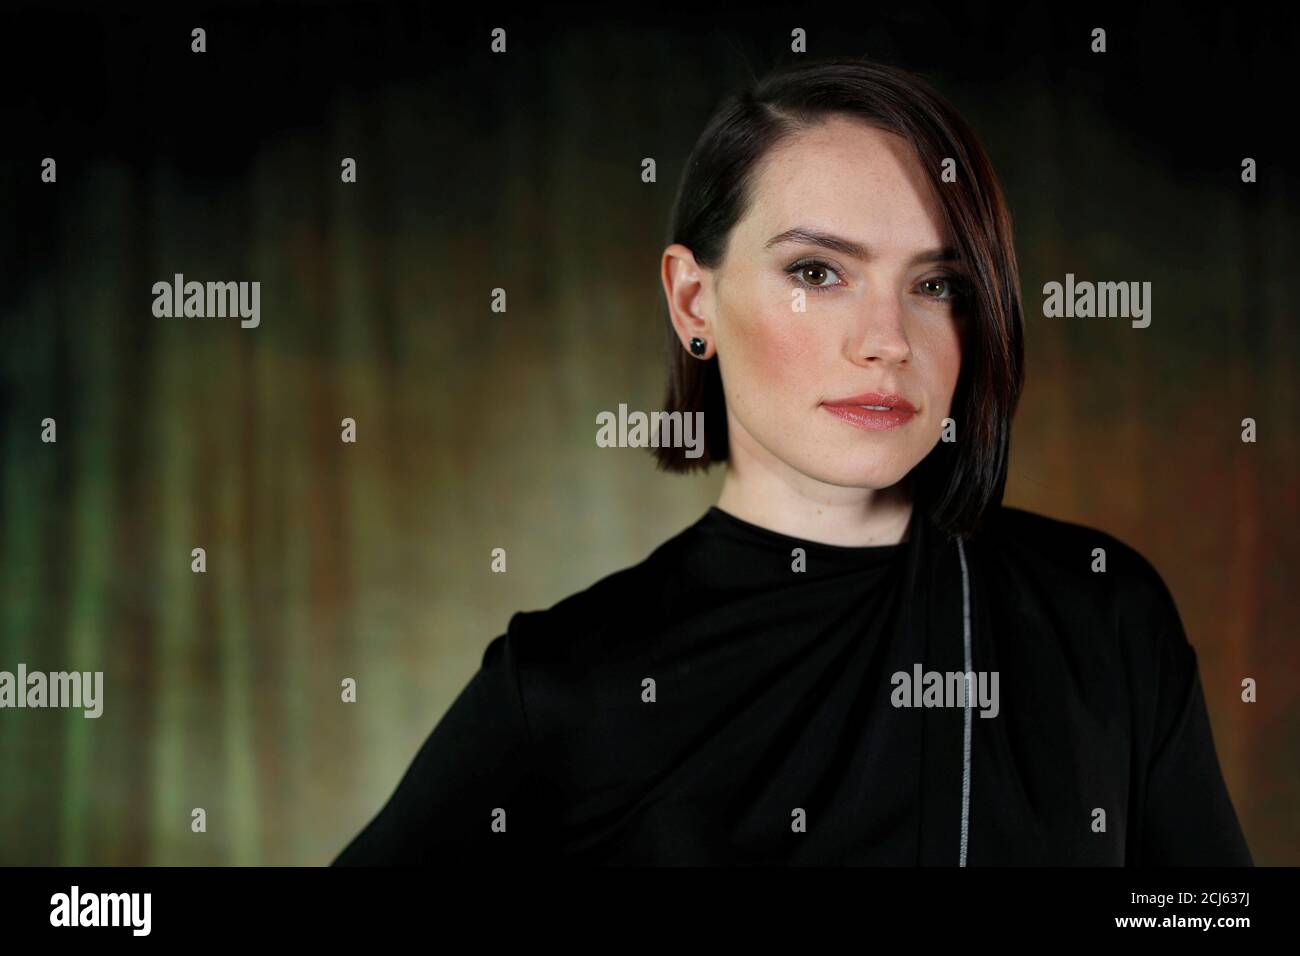 Cast member Daisy Ridley poses for a portrait while promoting the film 'Star Wars: The Rise of Skywalker' in Pasadena, California, U.S., December 3, 2019. REUTERS/Mario Anzuoni Stock Photo